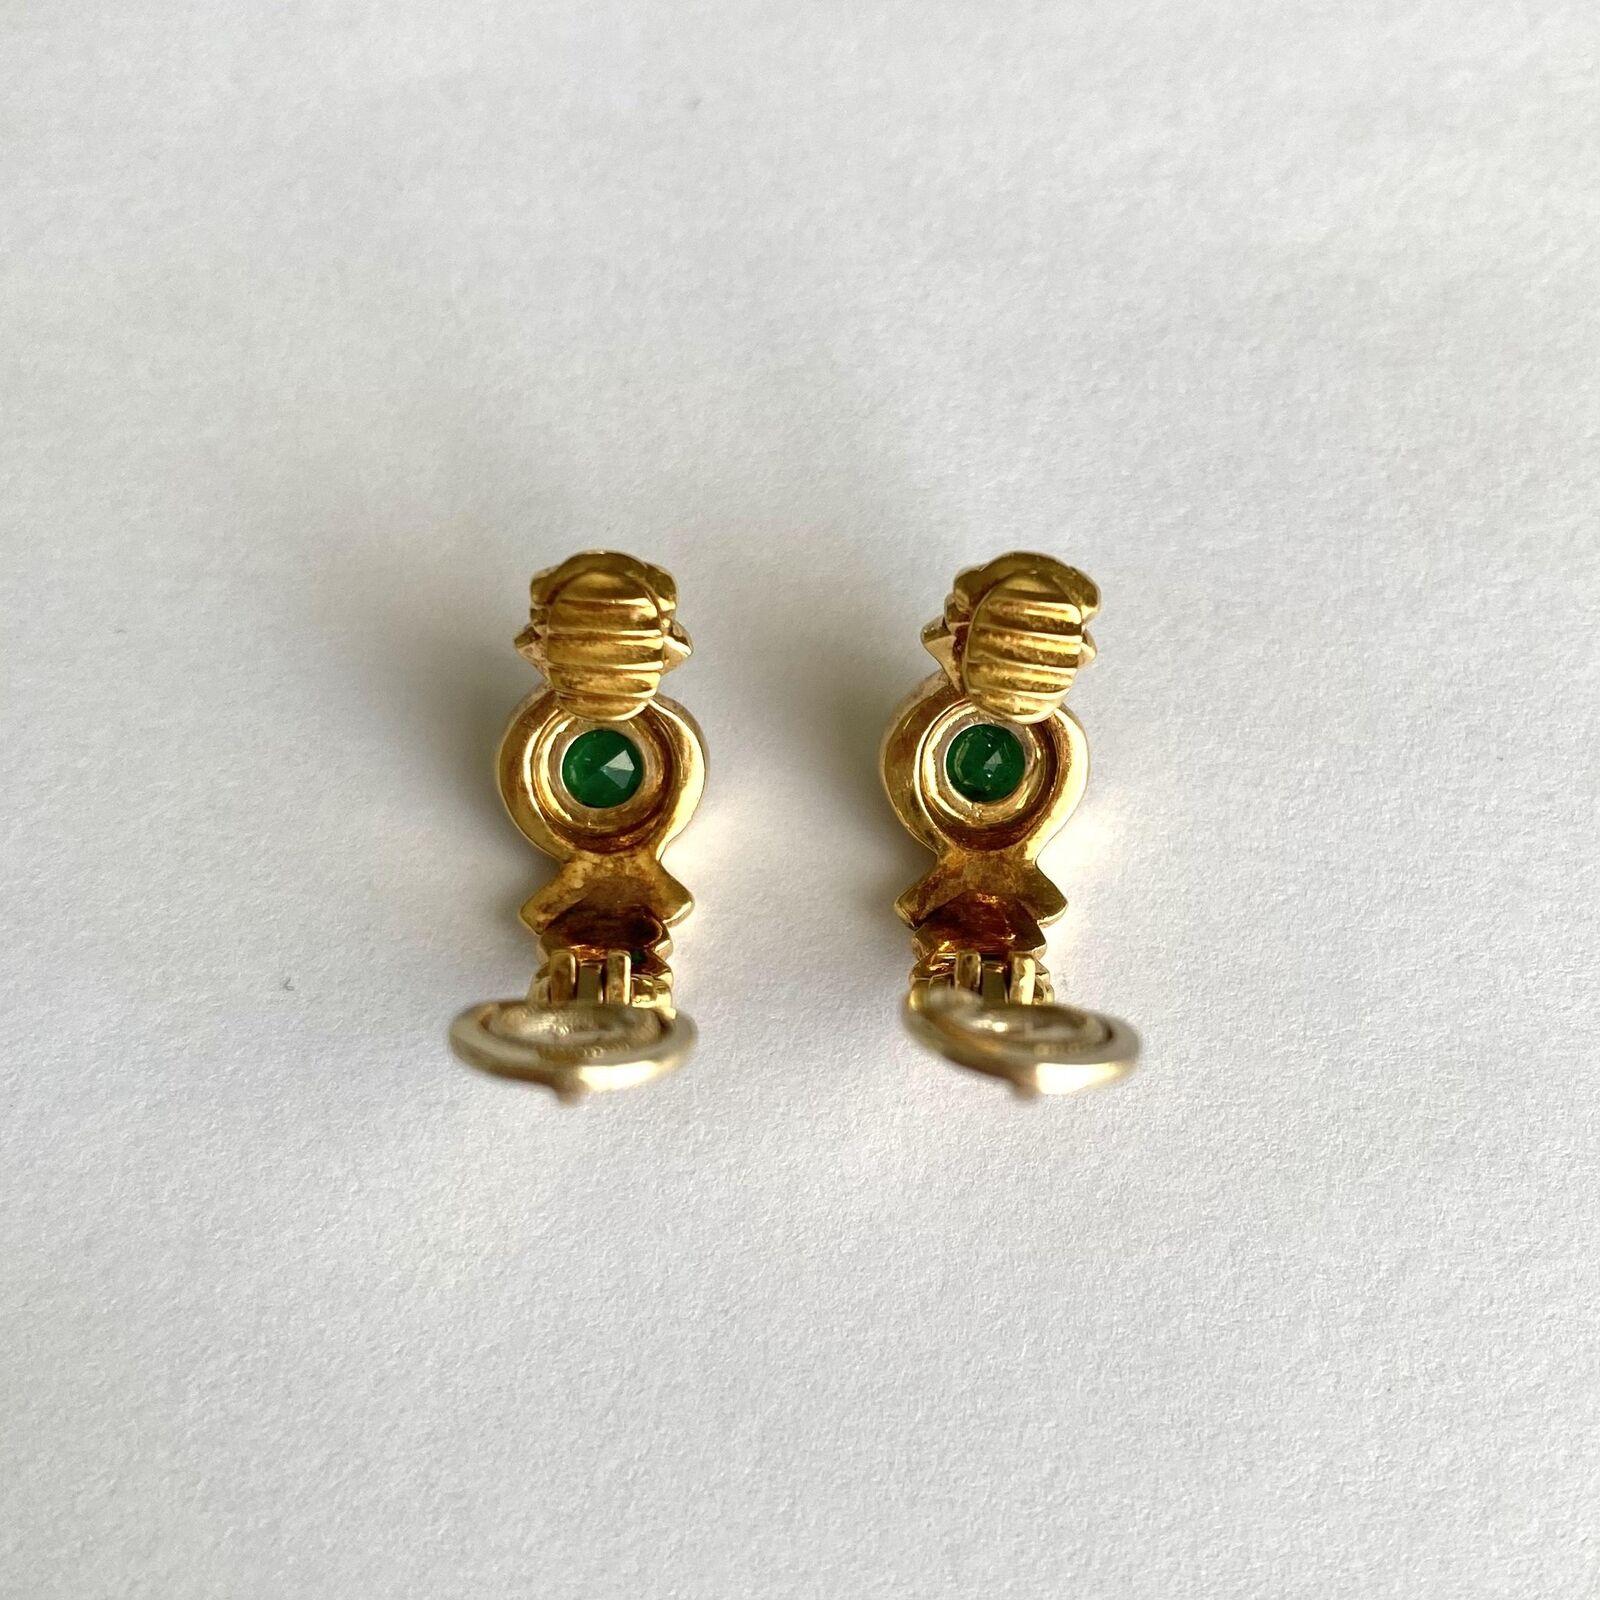 Fred Paris 18k Yellow Gold & Emerald Hoop Earrings Clip On Circa 1980s Vintage

Here is your chance to purchase a beautiful and highly collectible designer pair of earrings.  

The earrings weigh 10.7 grams and are fully hallmarked with vintage